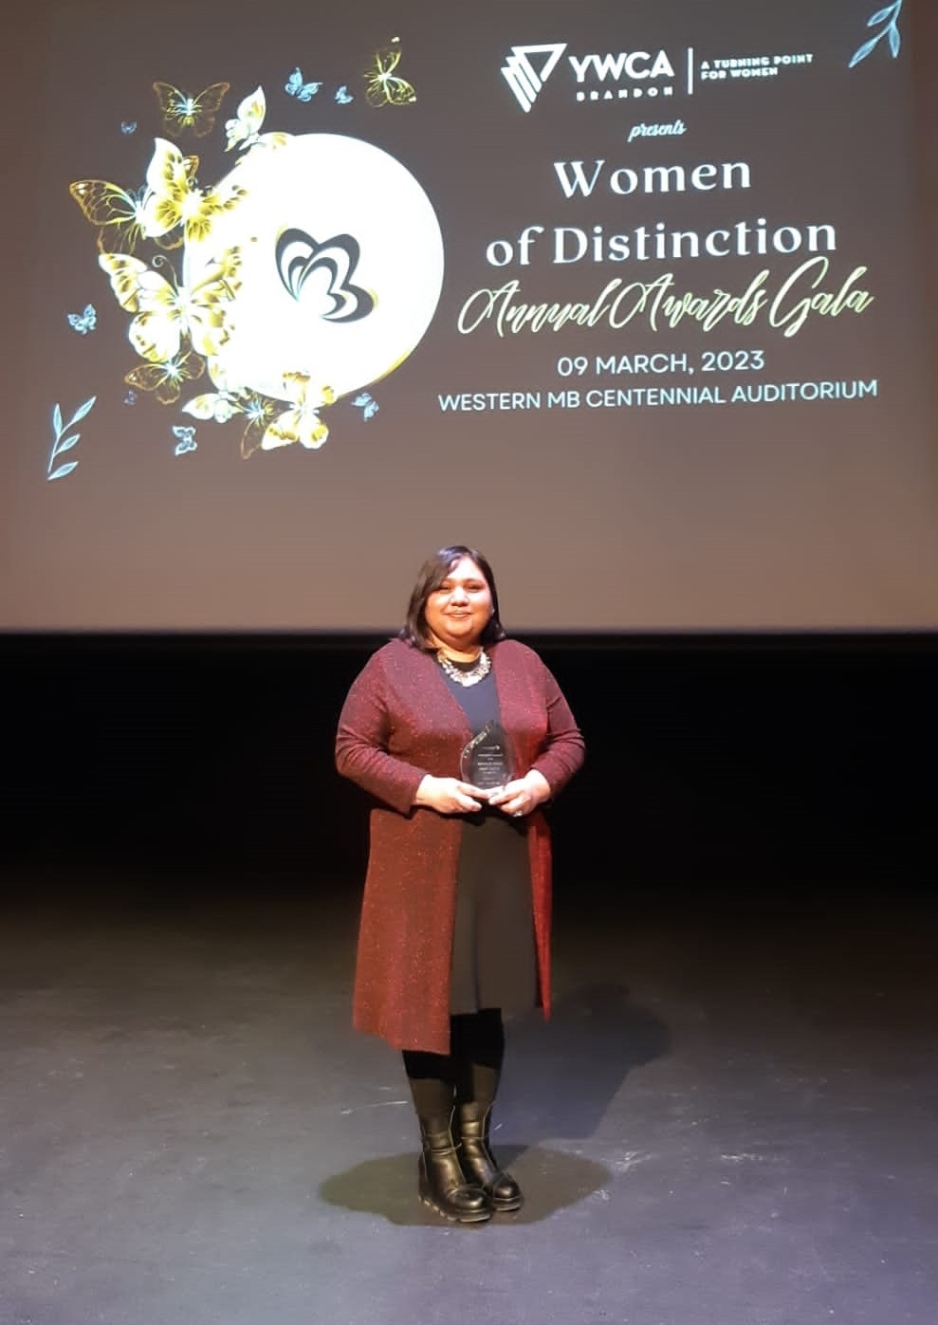 Dr. Poonam Singh standing on the WMCA stage, posing with a glass award during the "Women of Distinction" awards gala on March 9th, 2023.